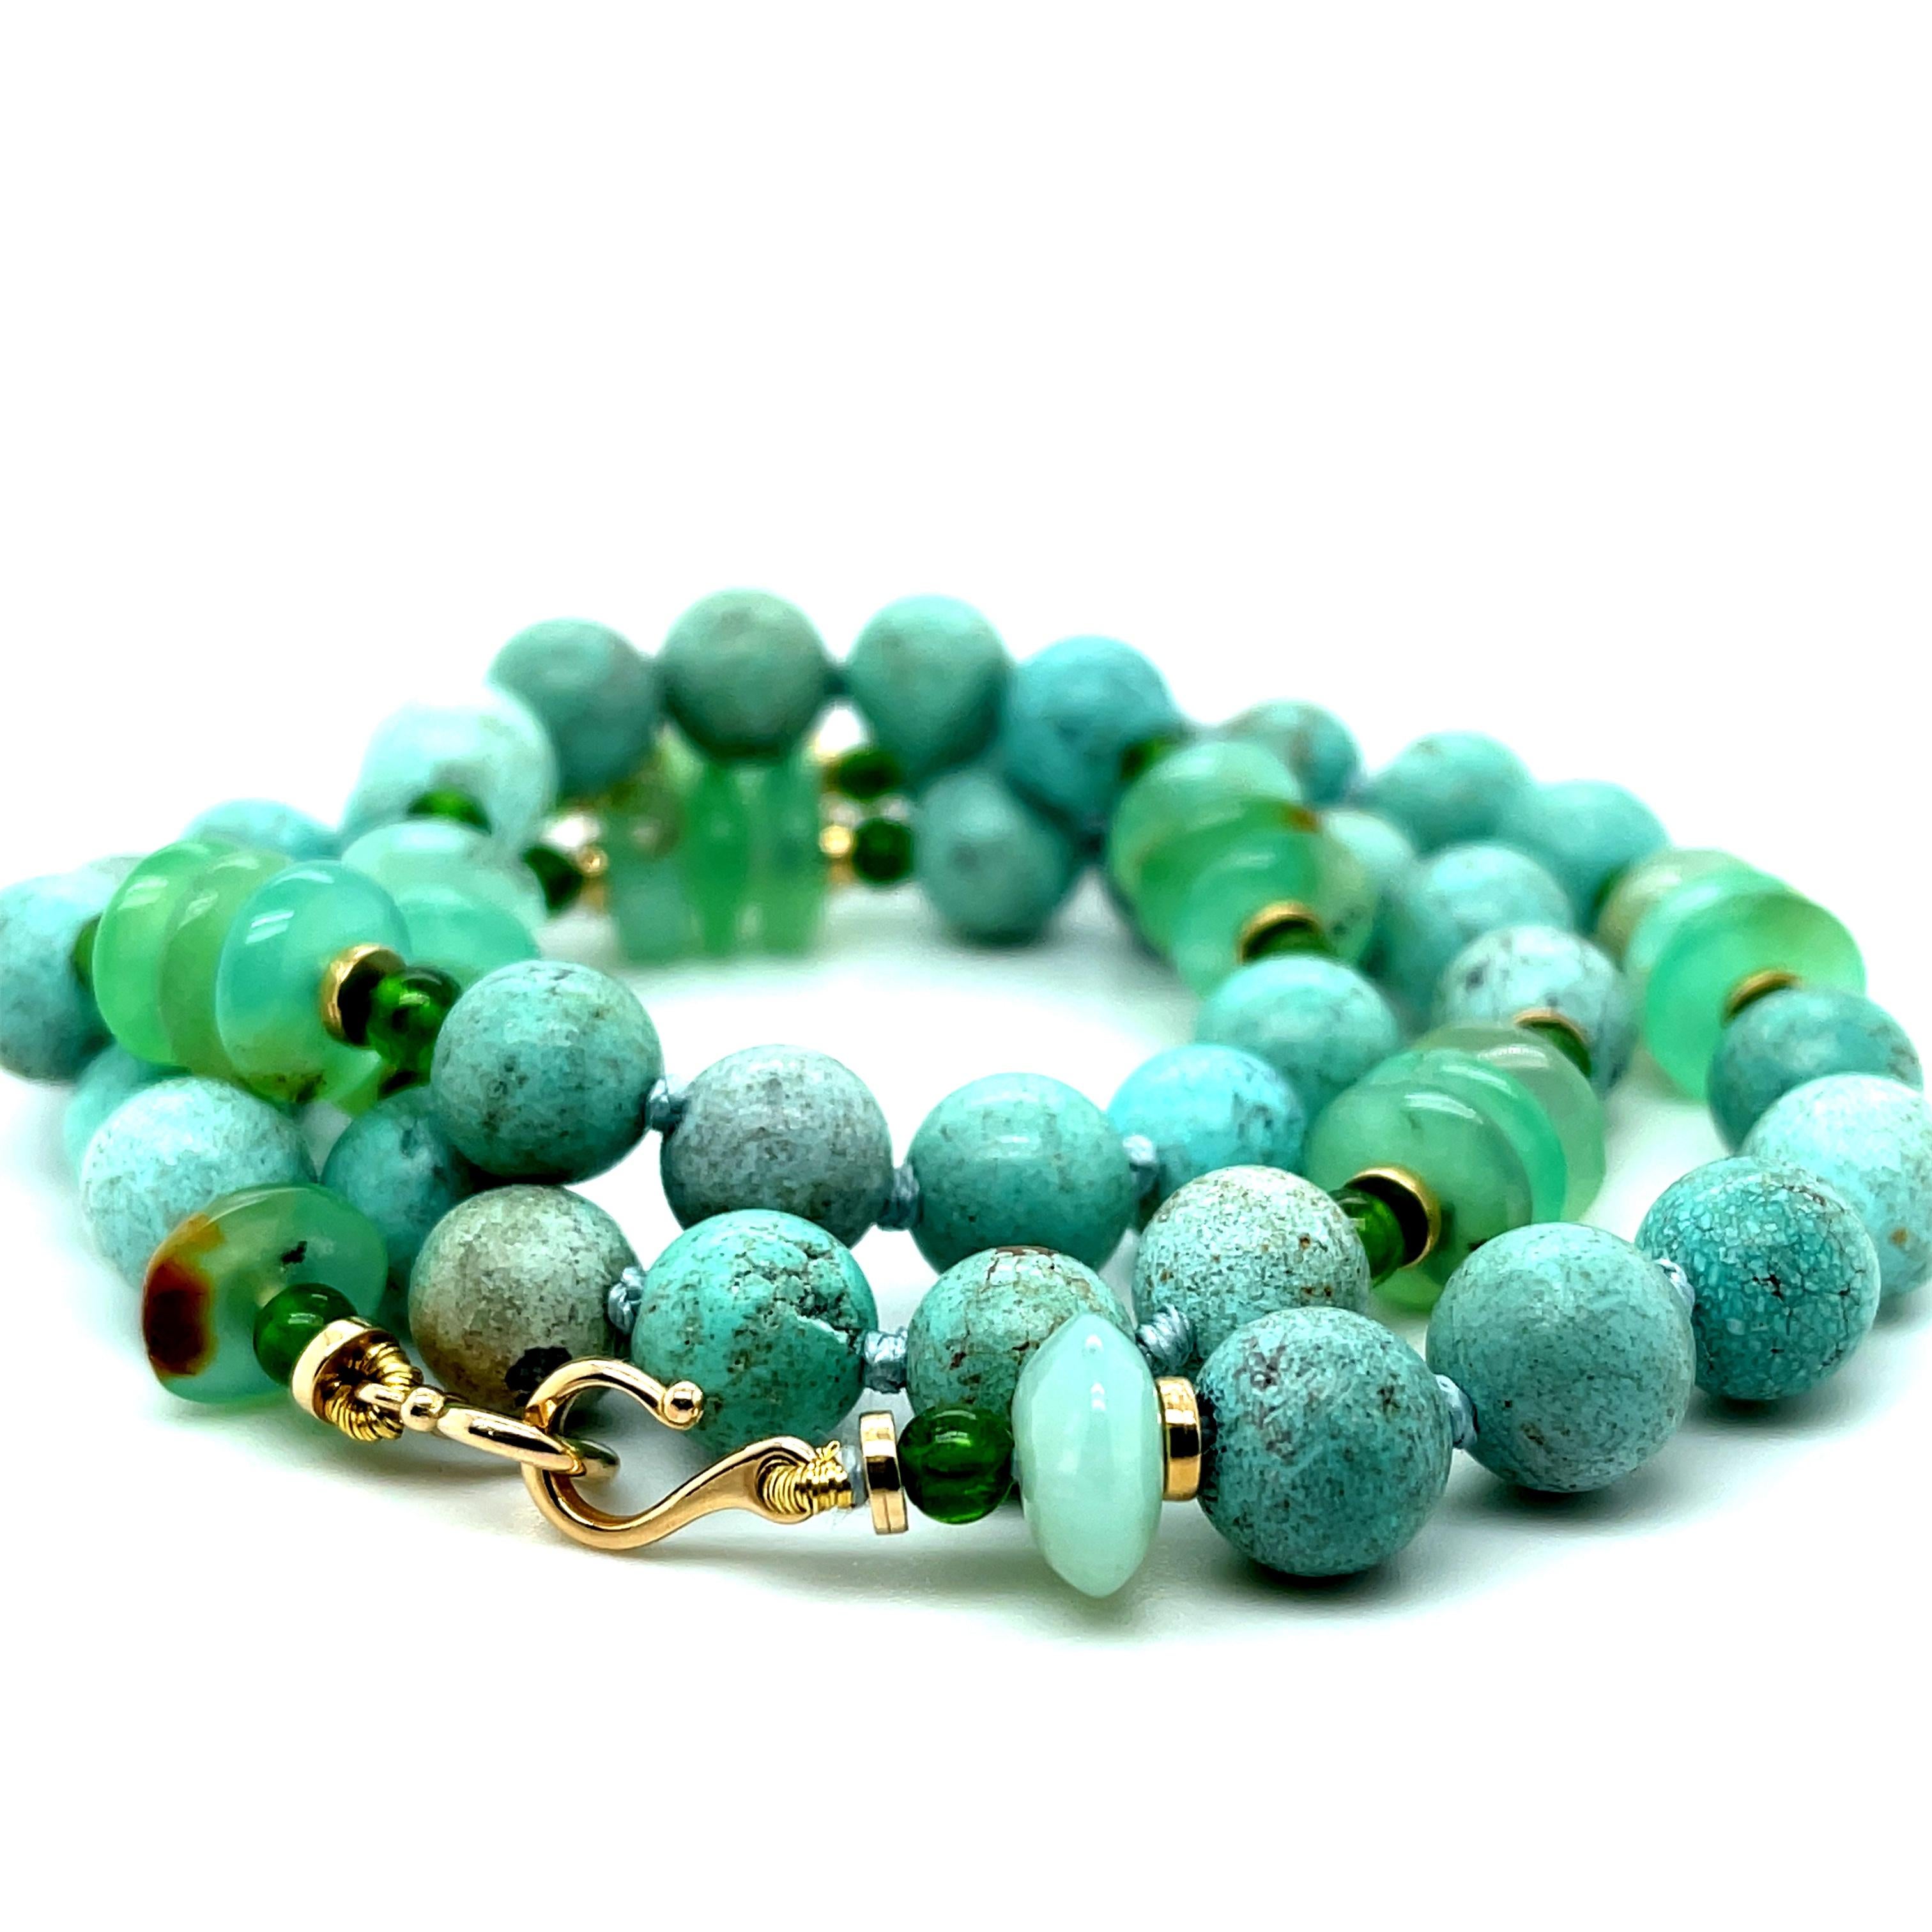 Beautiful greenish blue turquoise is paired with bright chrome diopside and elegant chrysoprase in this pretty necklace that is perfect for all seasons! The 8mm round turquoise has lovely color and subtle veining that gives each bead its own